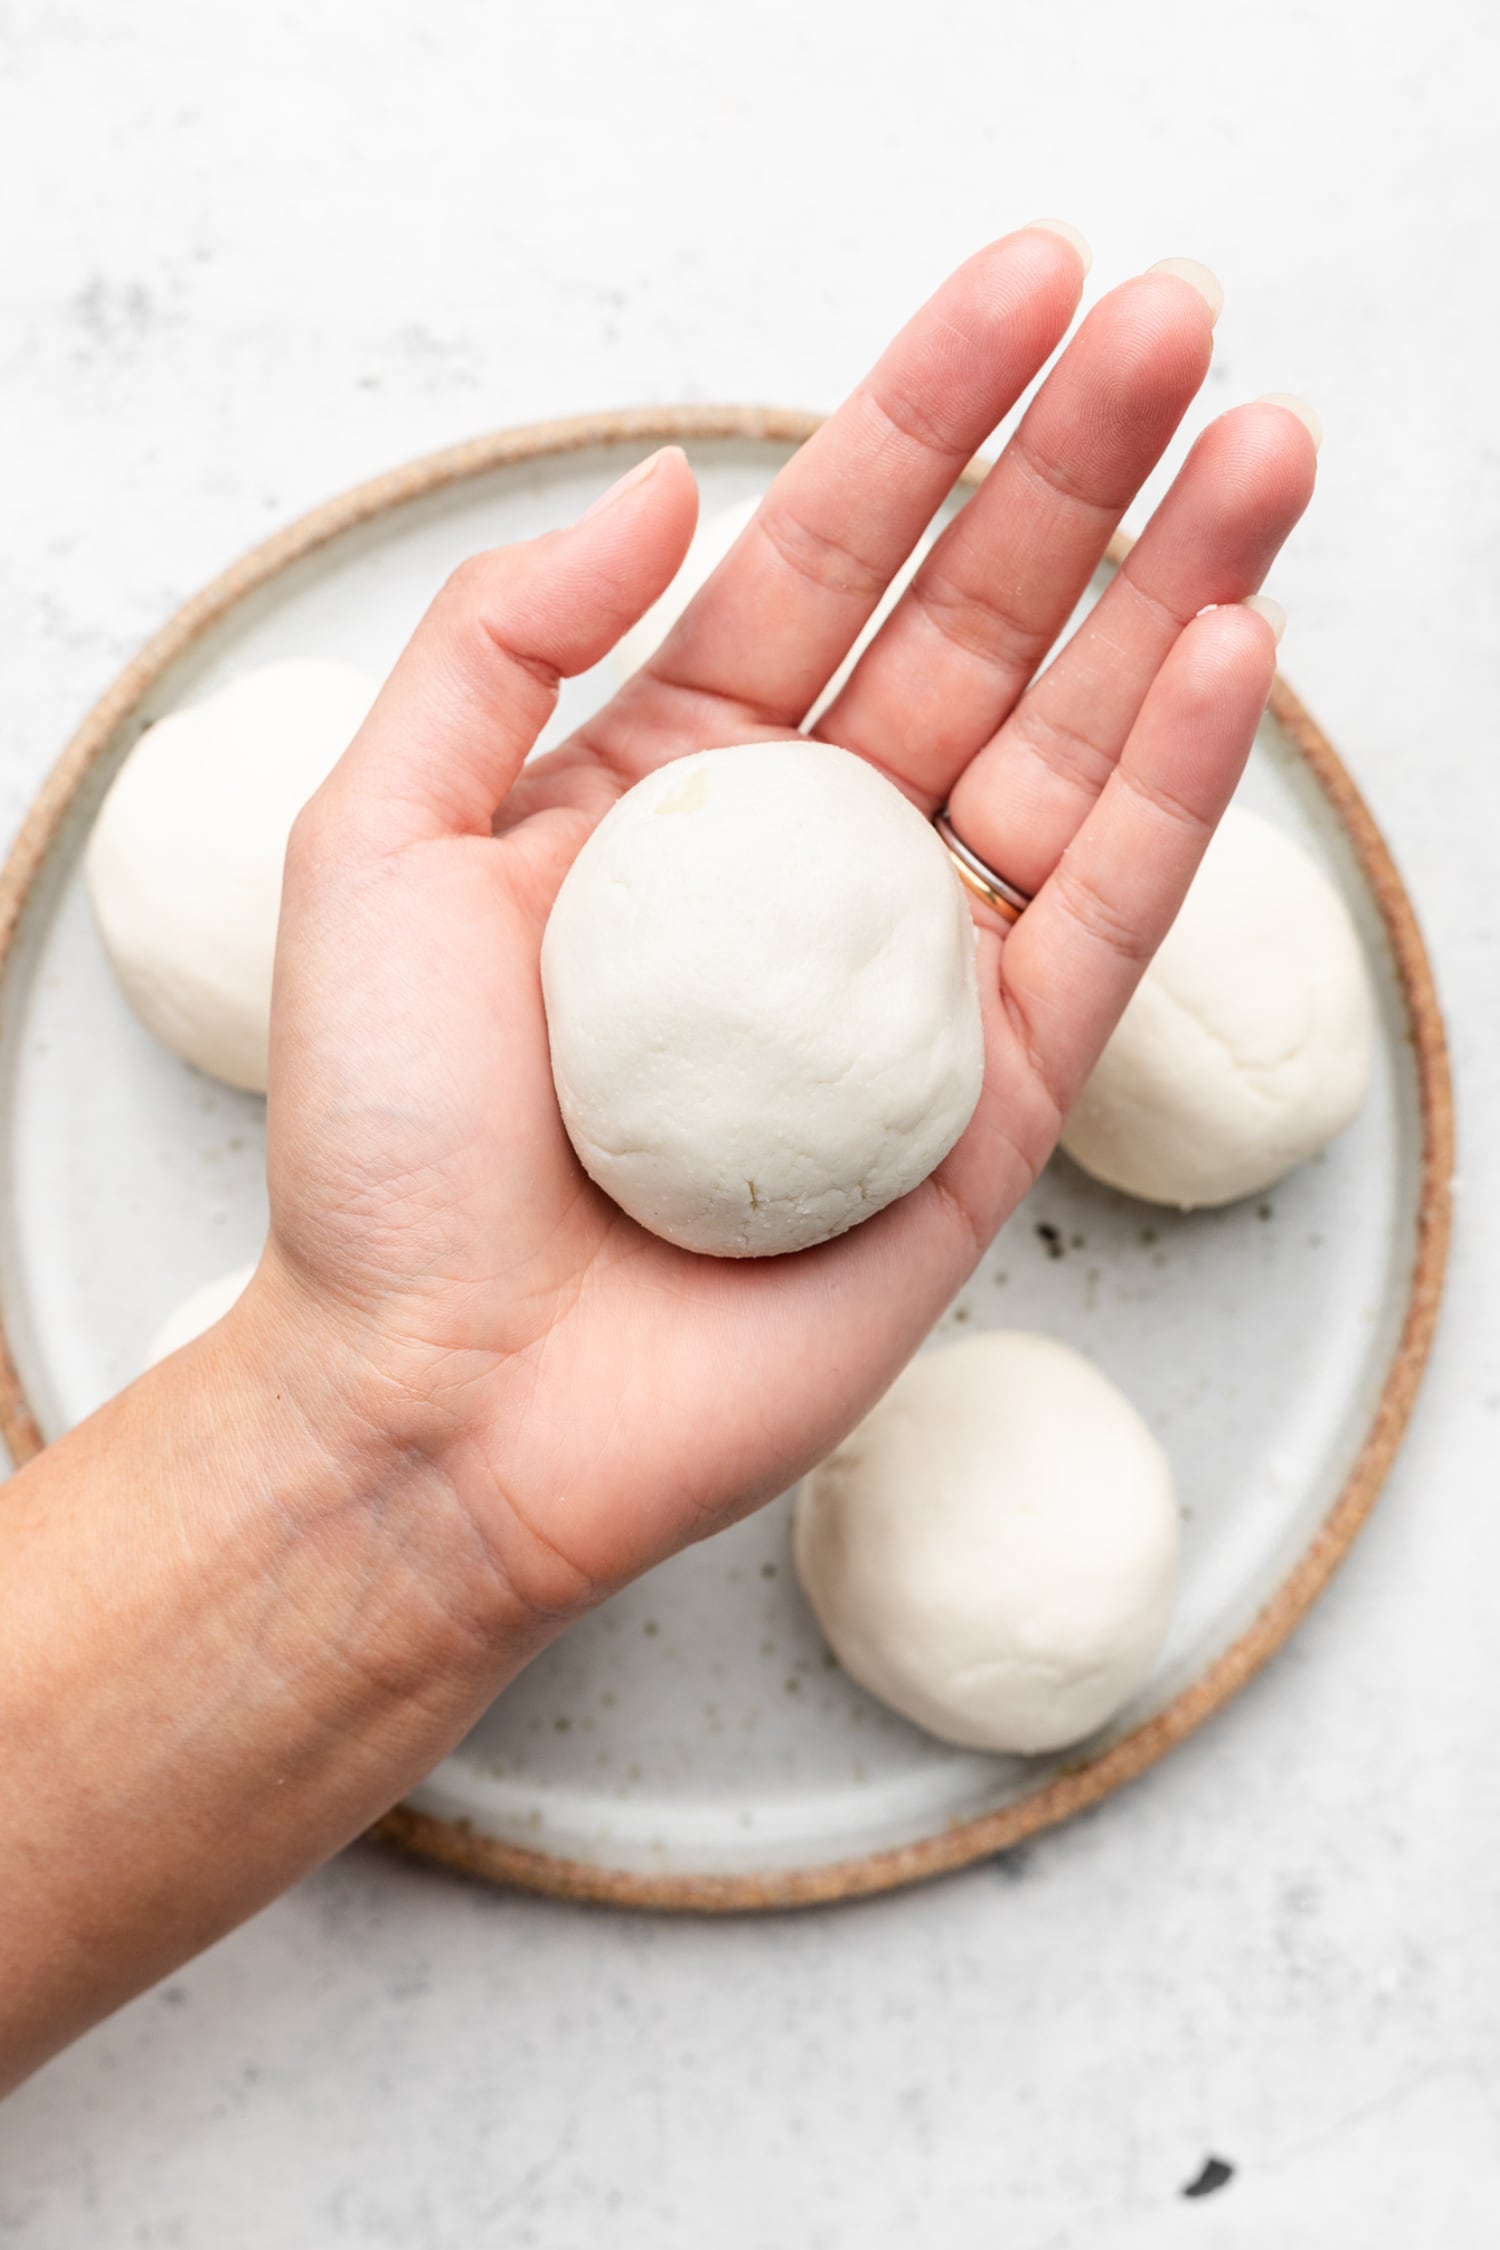 golf ball sized ball of naan dough in palm of hand